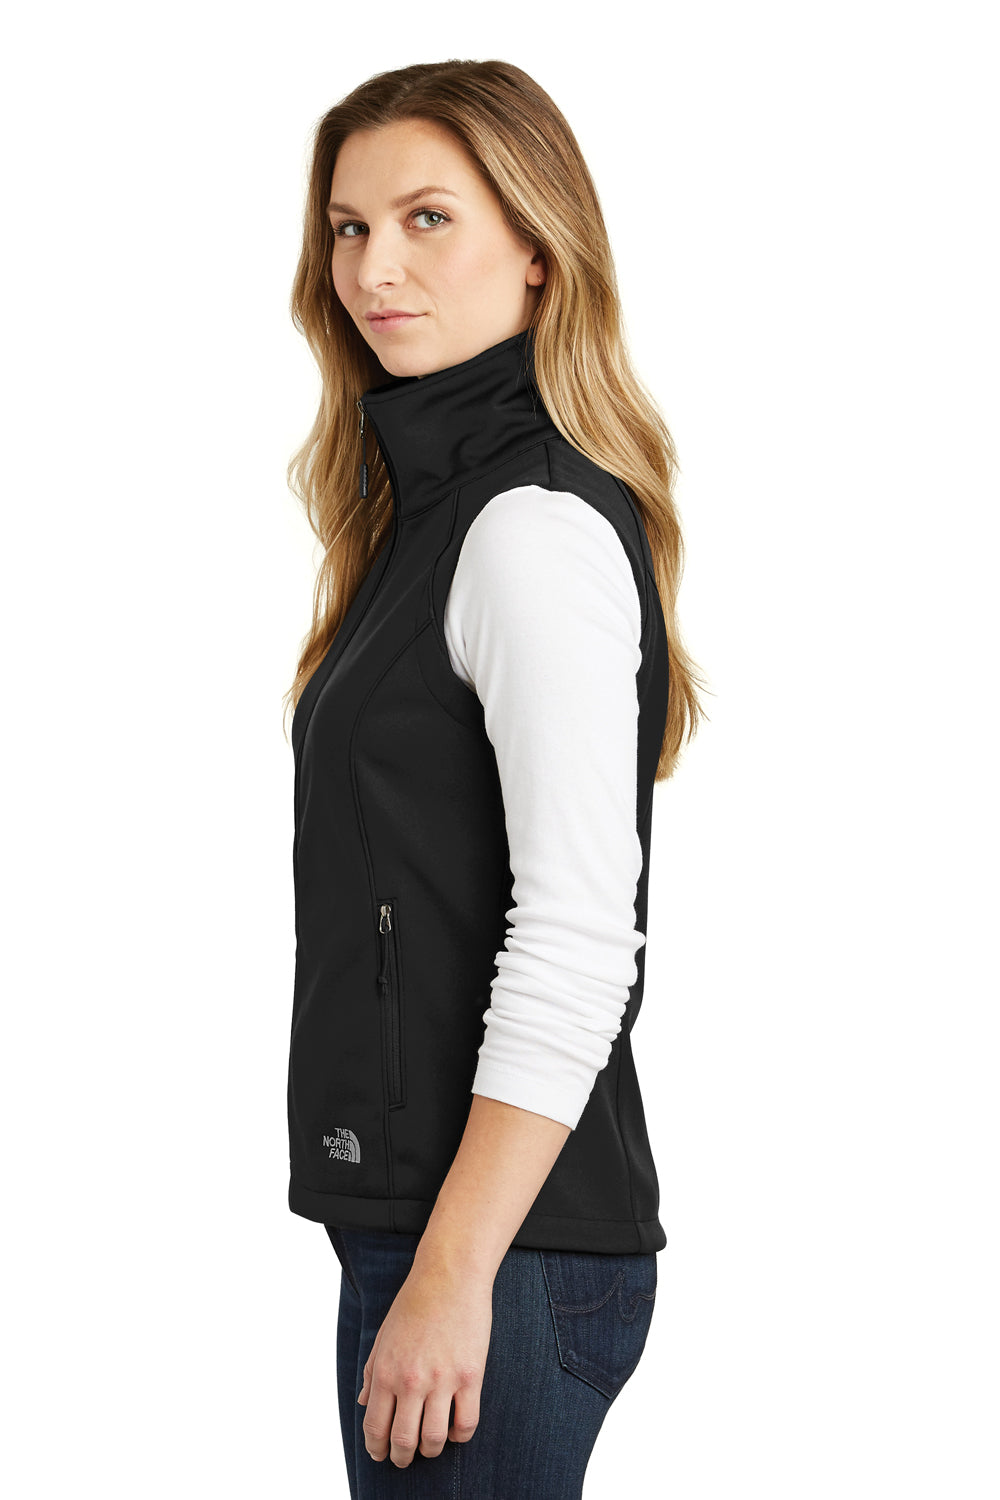 The North Face NF0A3LH1 Womens Ridgeline Wind & Water Resistant Full Zip Vest Black Side